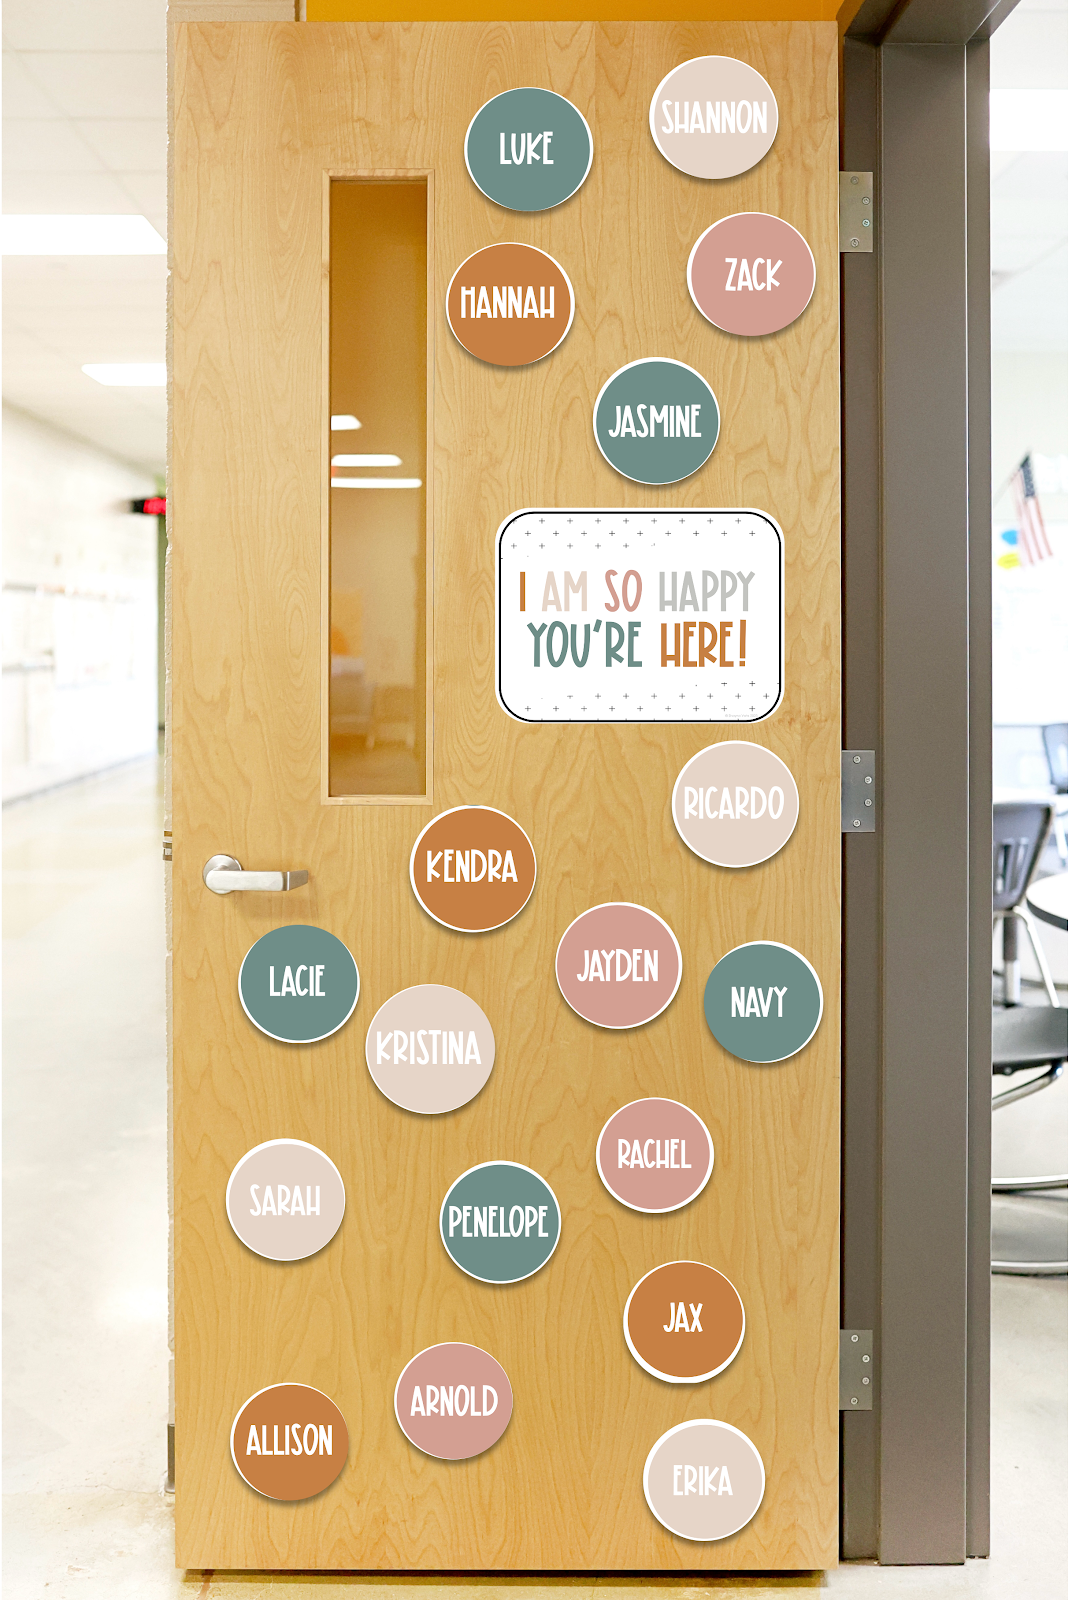 This image shows a classroom door with neutral-colored circles covering the door. Each circle has the name of one student written on it. In the middle of the door is a poster that reads "I am so happy you're here!" 